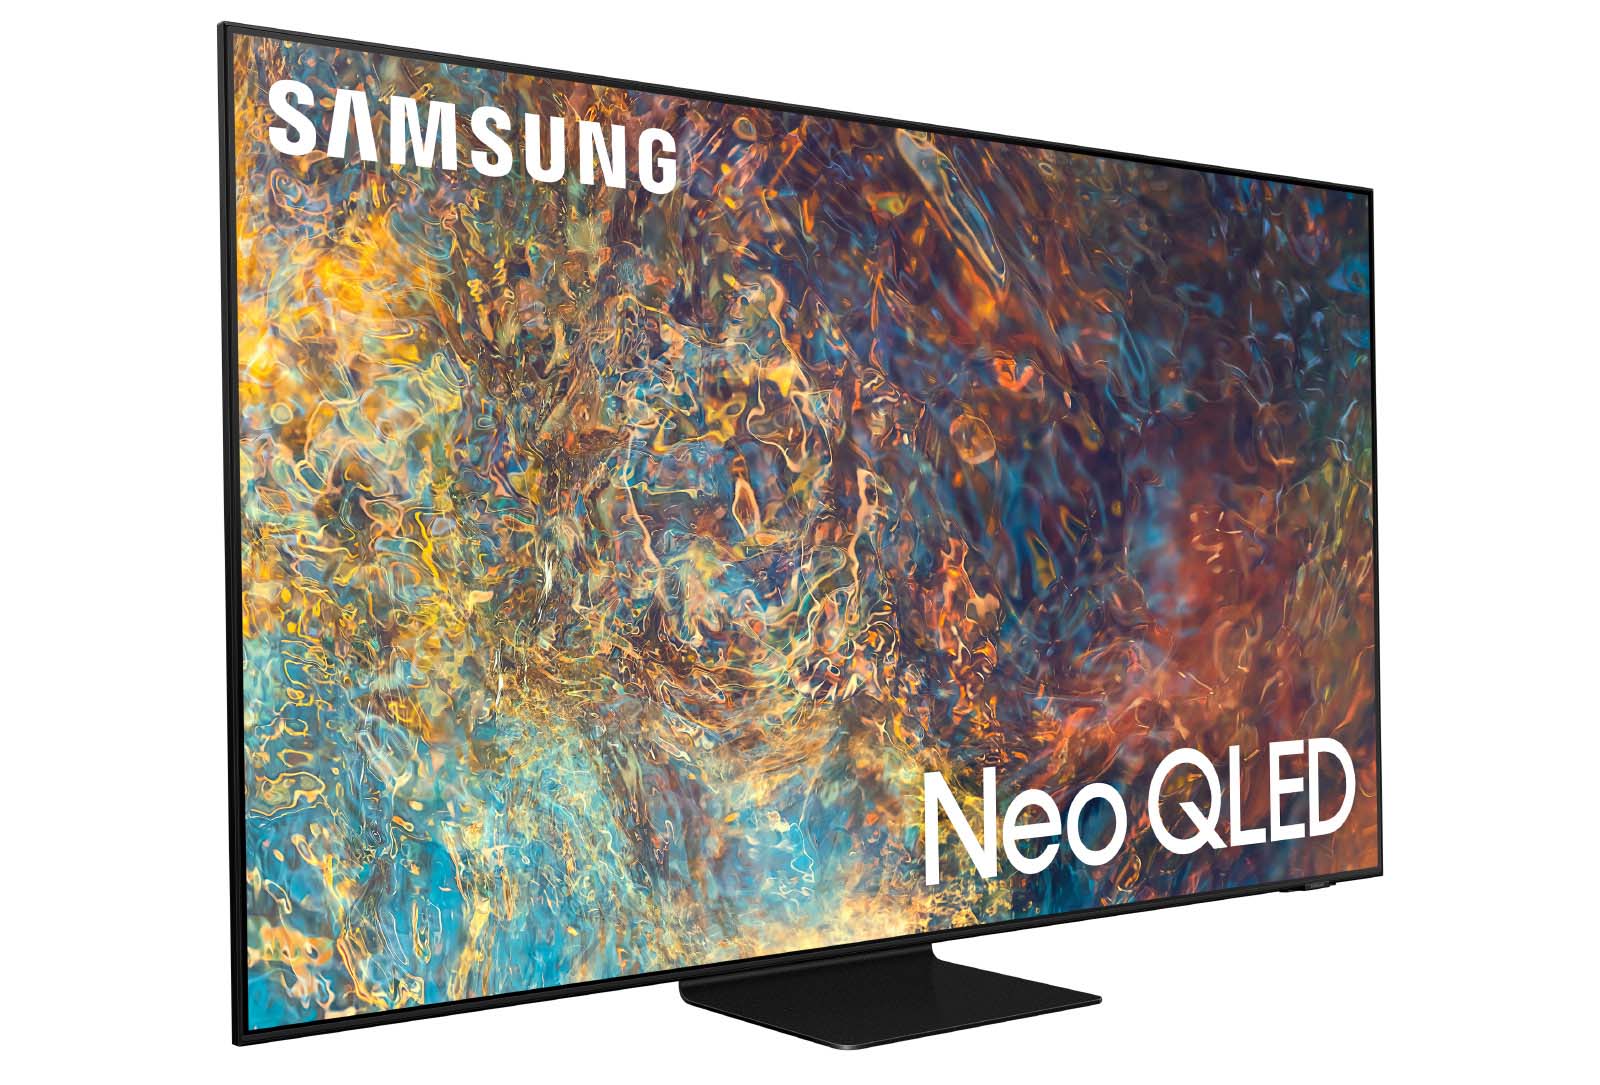 Sports fans seeking the best TV need a screen that holds up in bright light yet looks great with the lights off. Oh, and it needs to be BIG! e2ff01ec 85 inch neo qled for sports